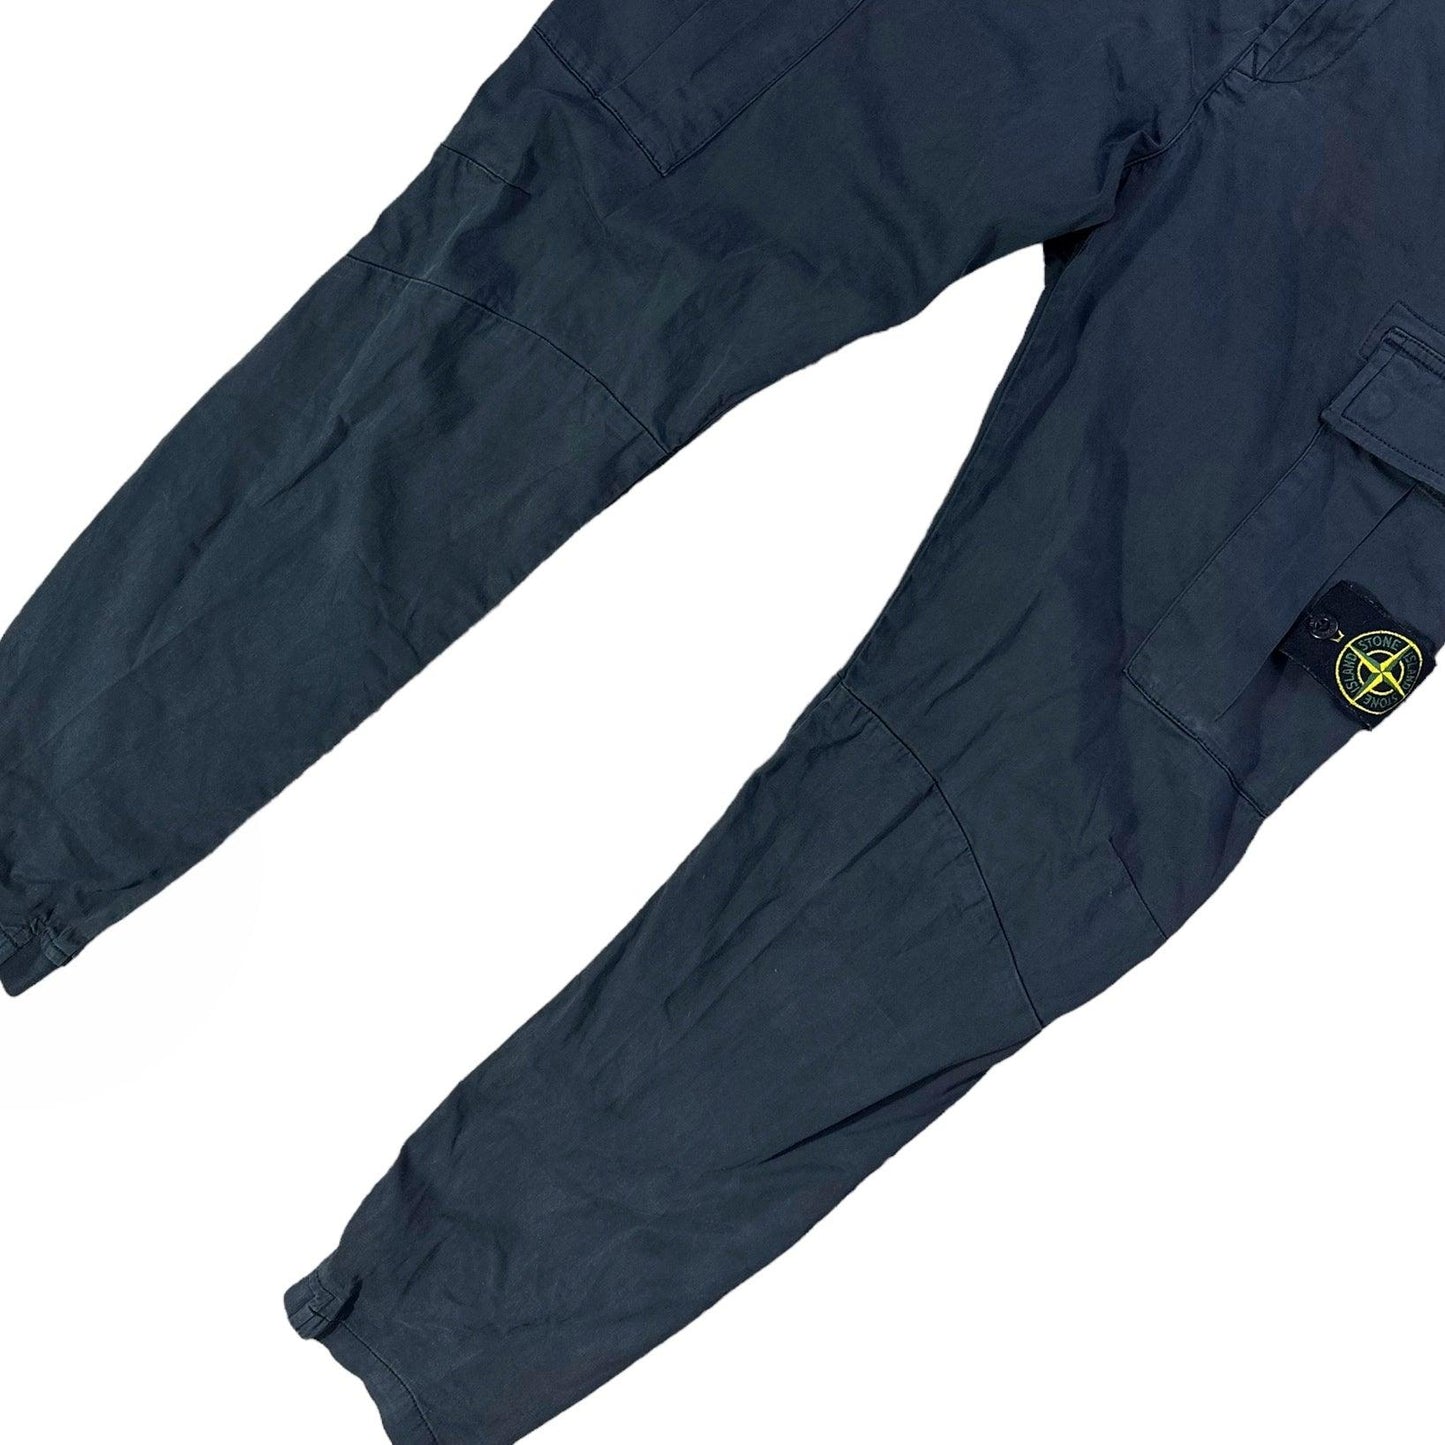 Stone Island Parachute Cuffed Cargo Trousers - Known Source